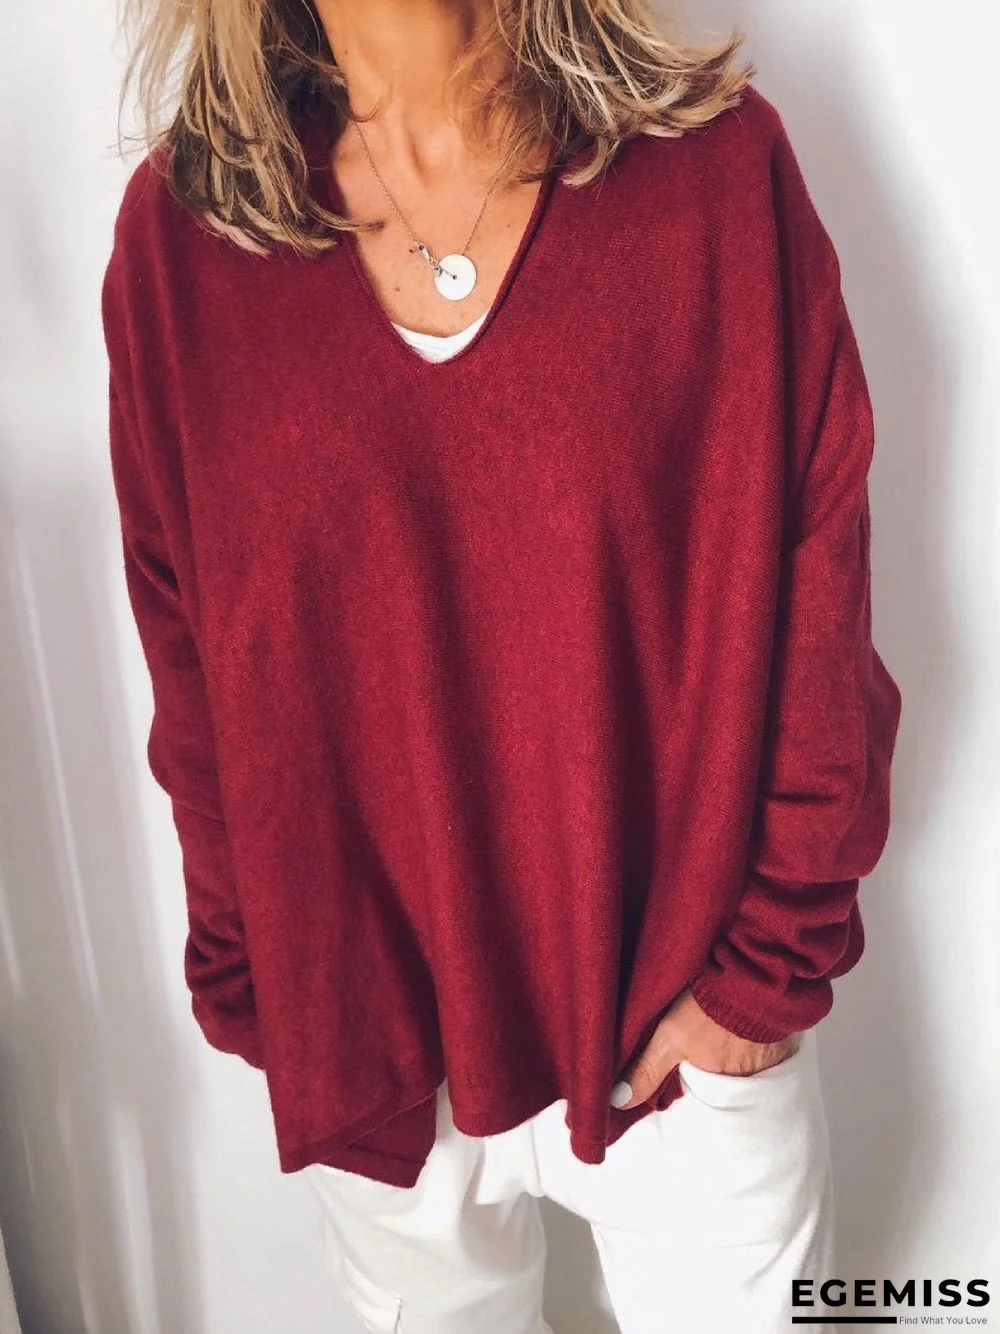 Red Long Sleeve Casual Shirts & Tops | EGEMISS